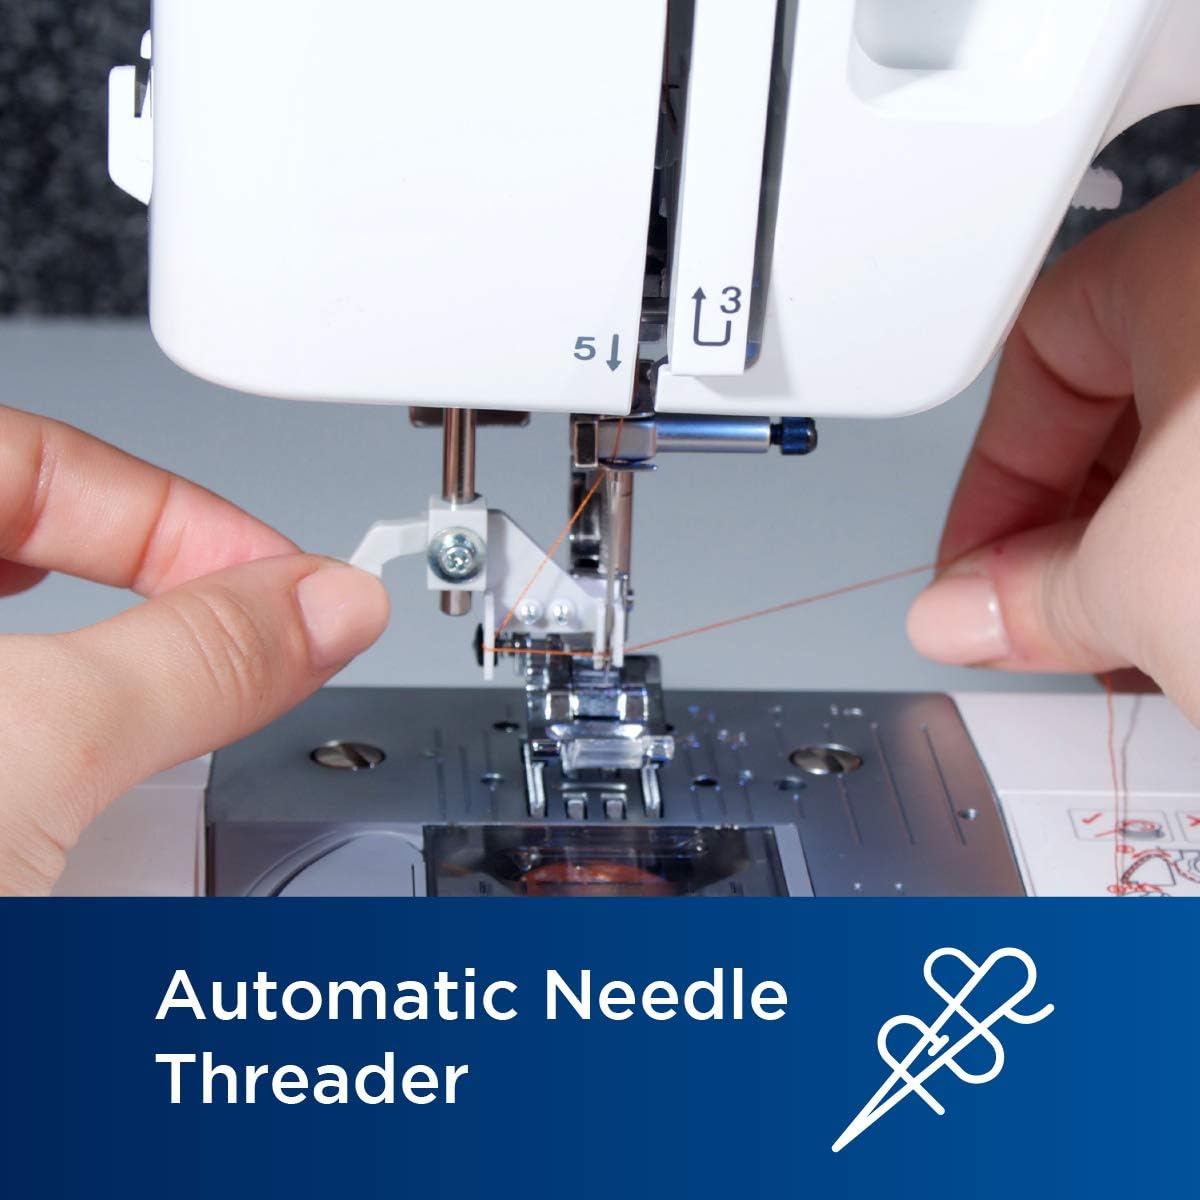 Automatic Built-in Needle Threader